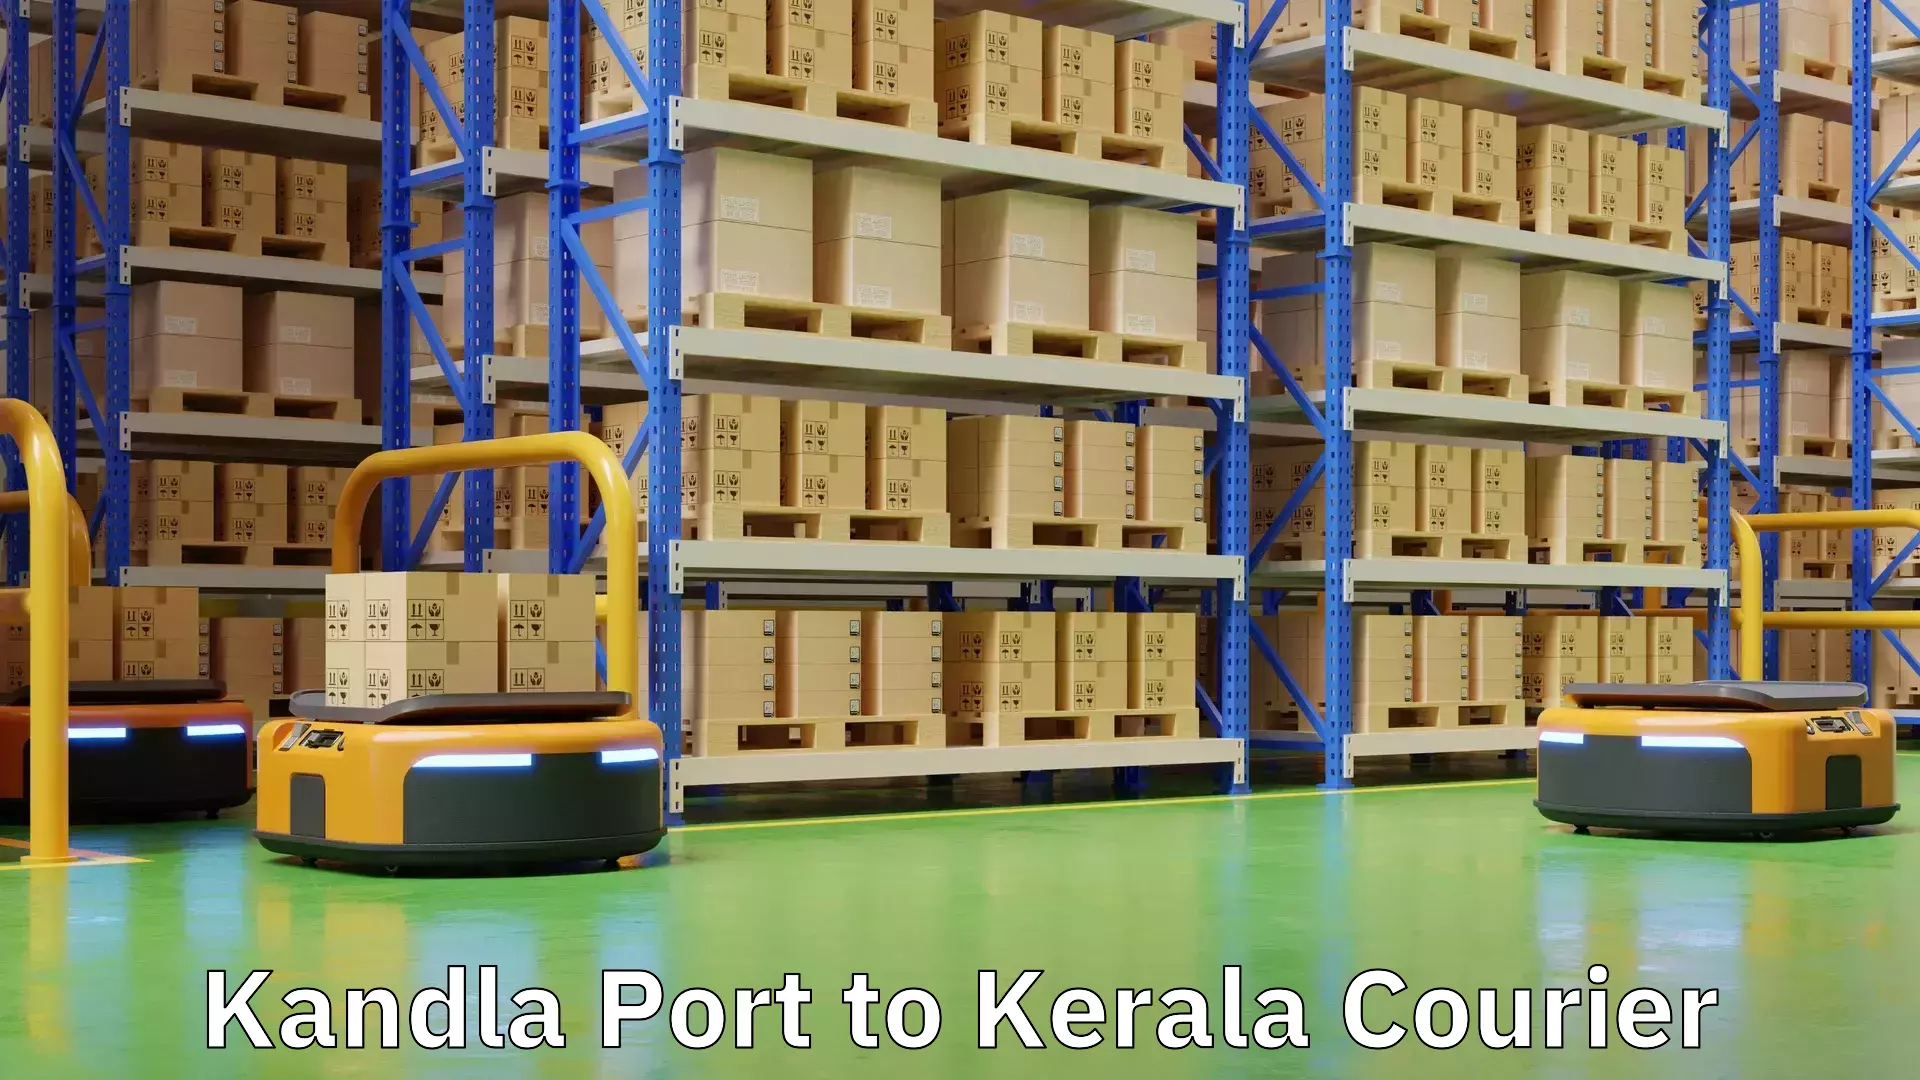 End-to-end delivery Kandla Port to Kerala